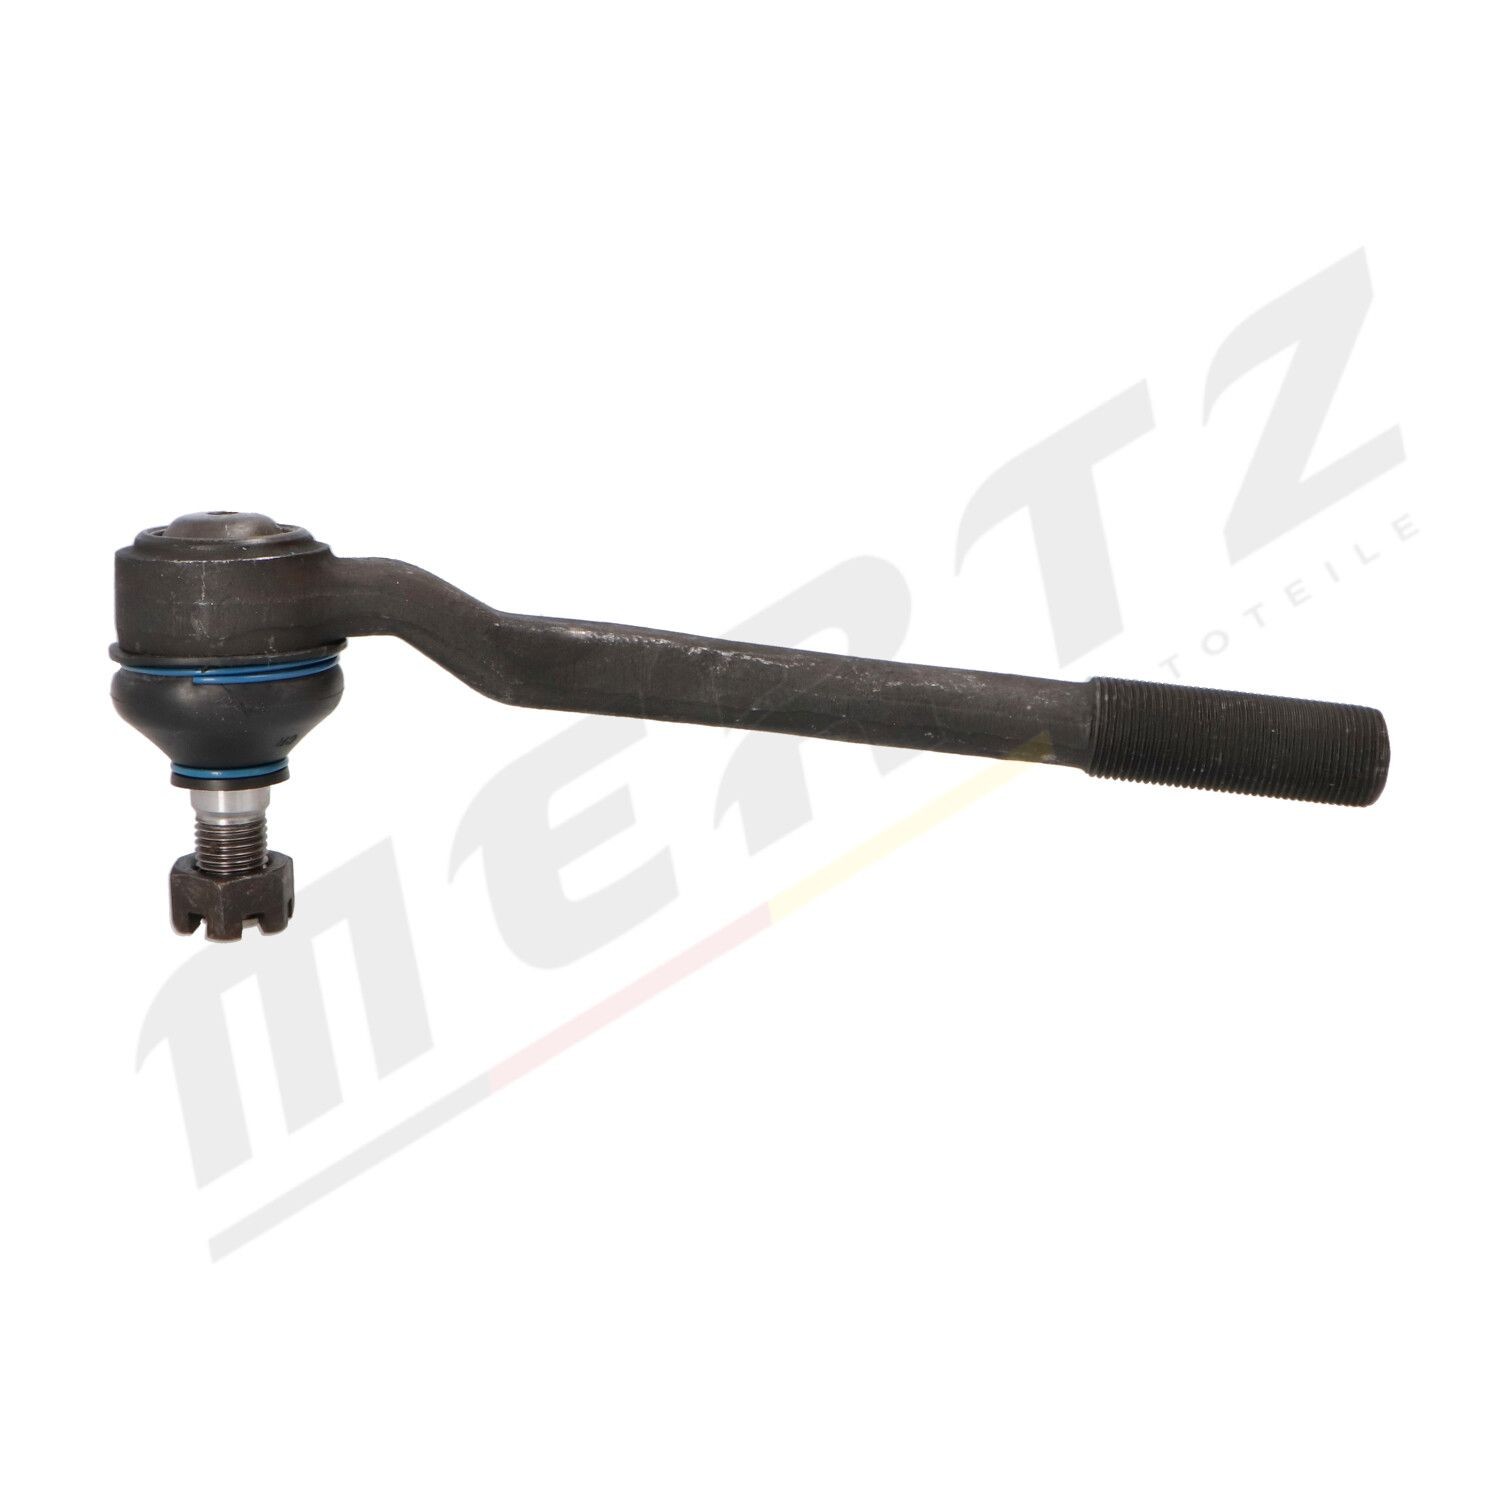 M-S1546 Tie rod end M-S1546 MERTZ M20x1,5, M14x1,5 mm, Front Axle Right, with crown nut